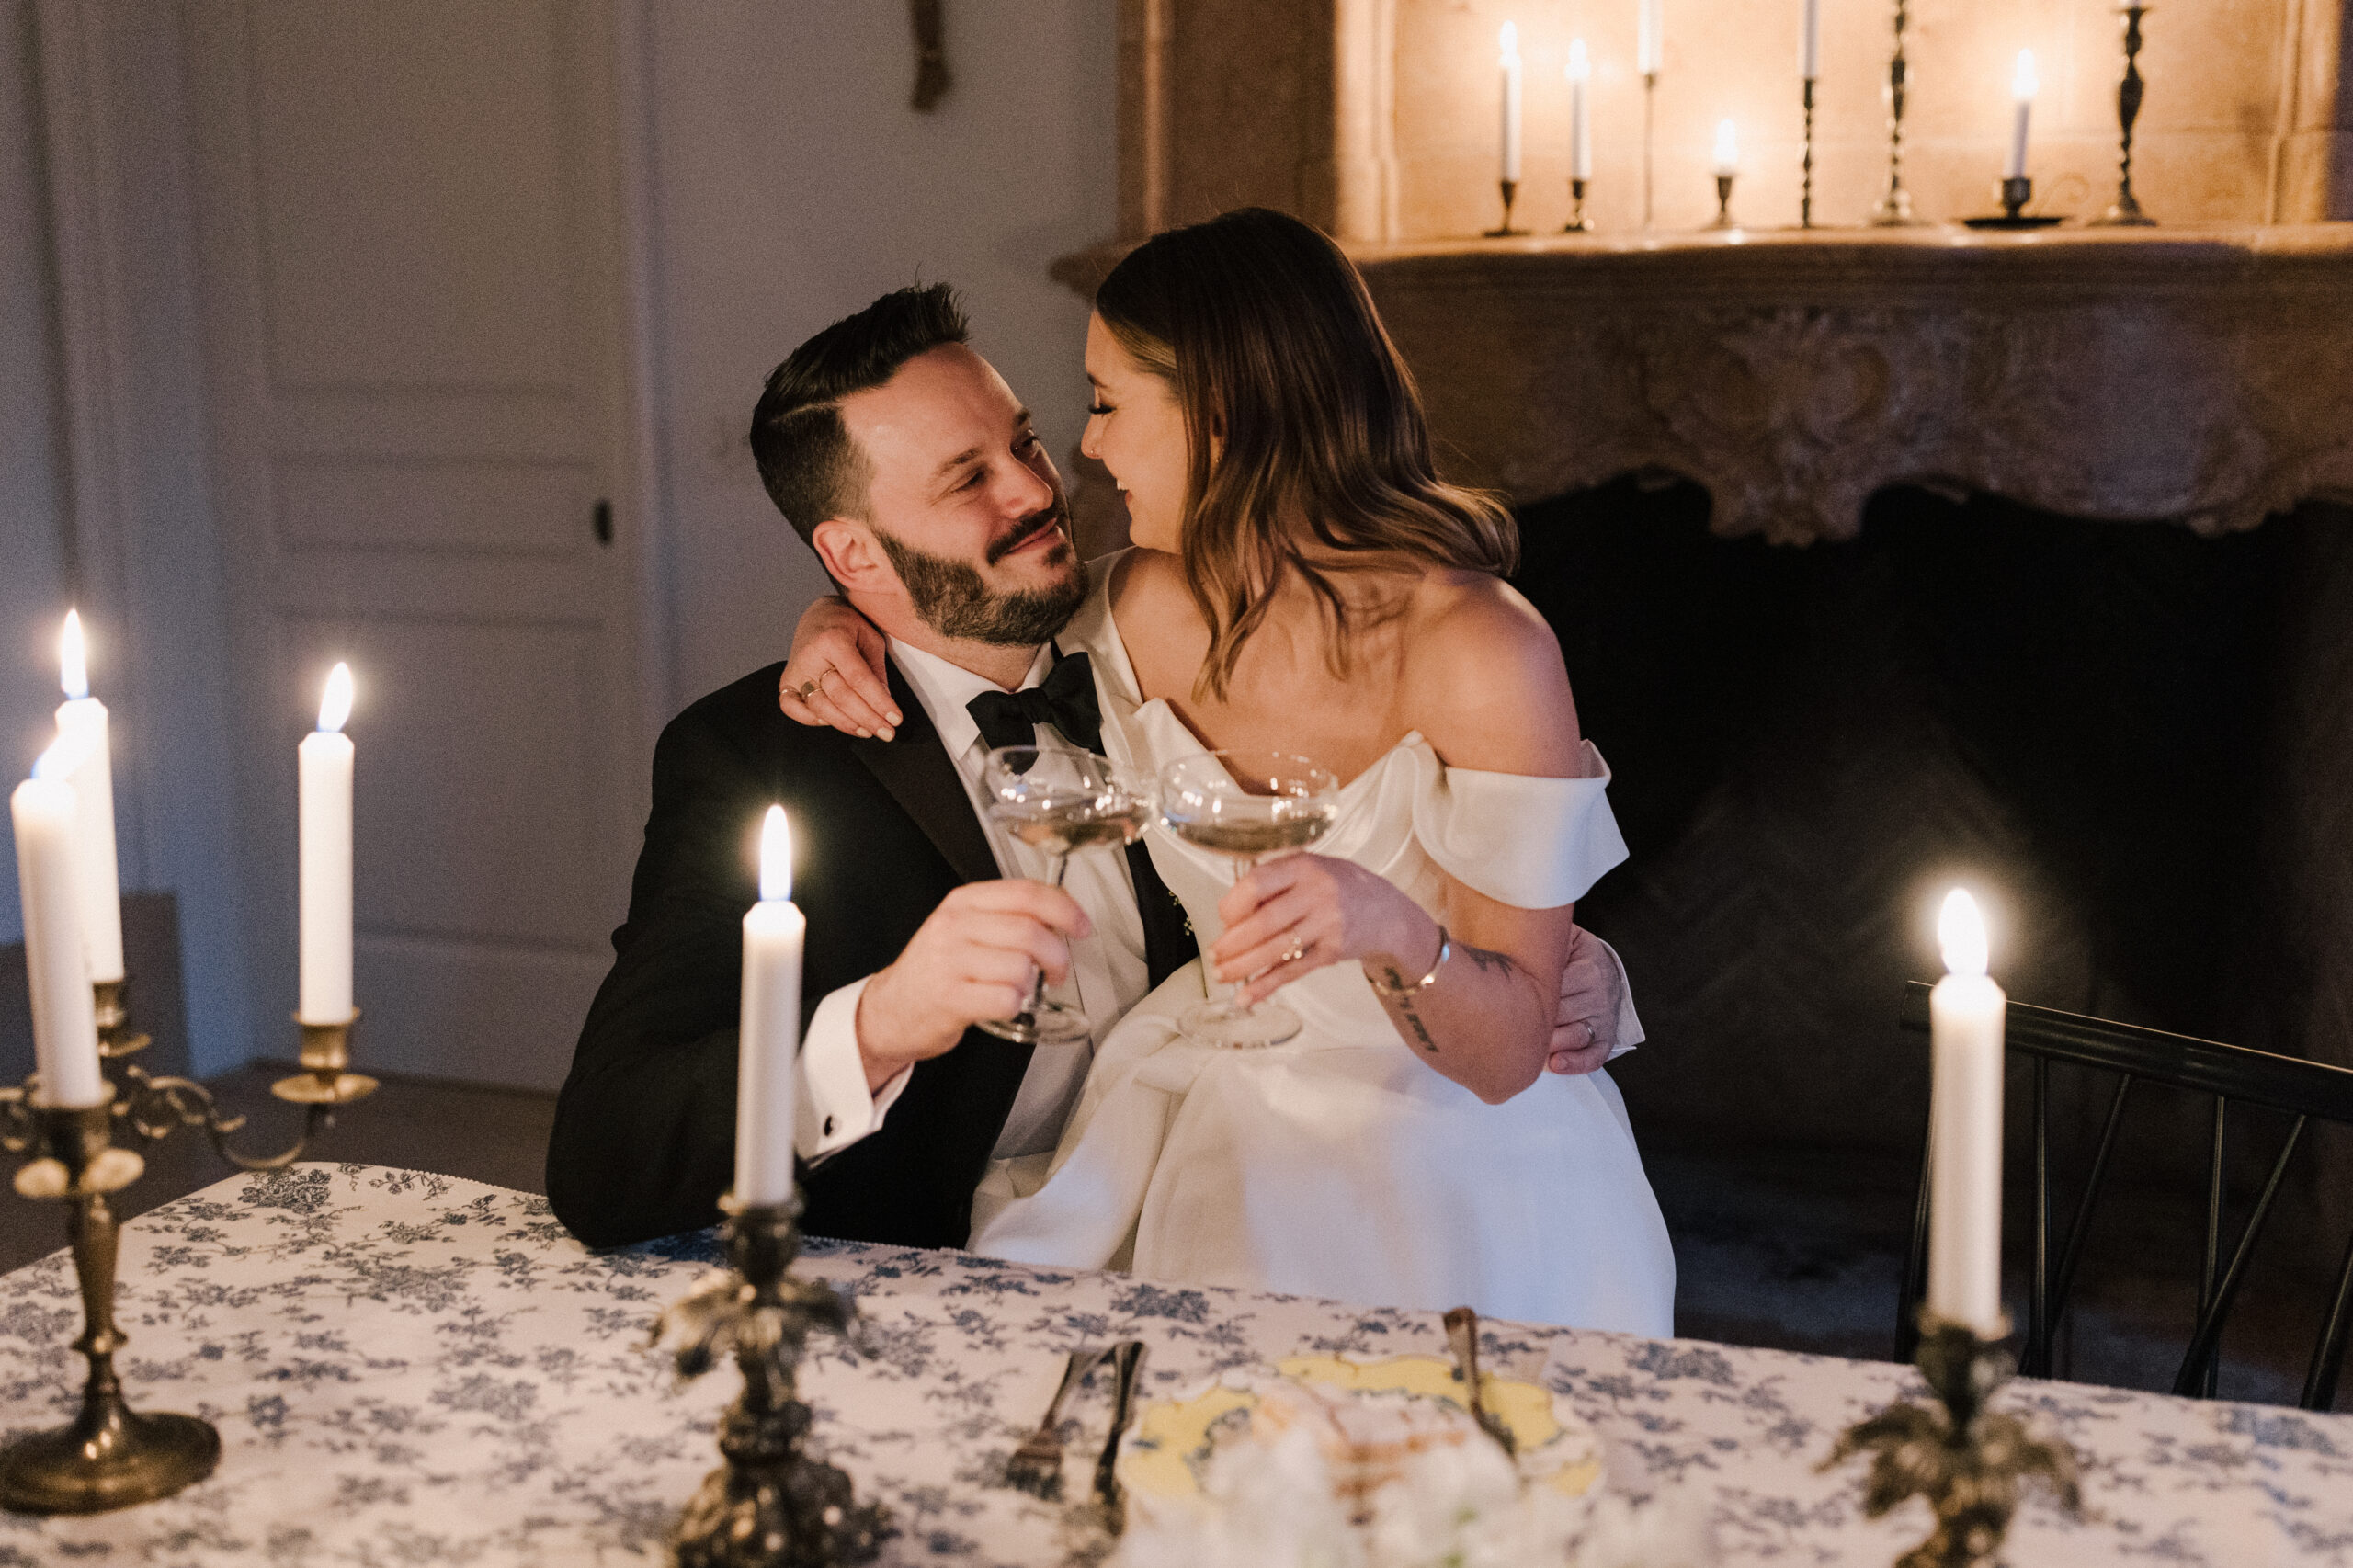 Oxbow Estate Couples Portraits at candlelit Reception